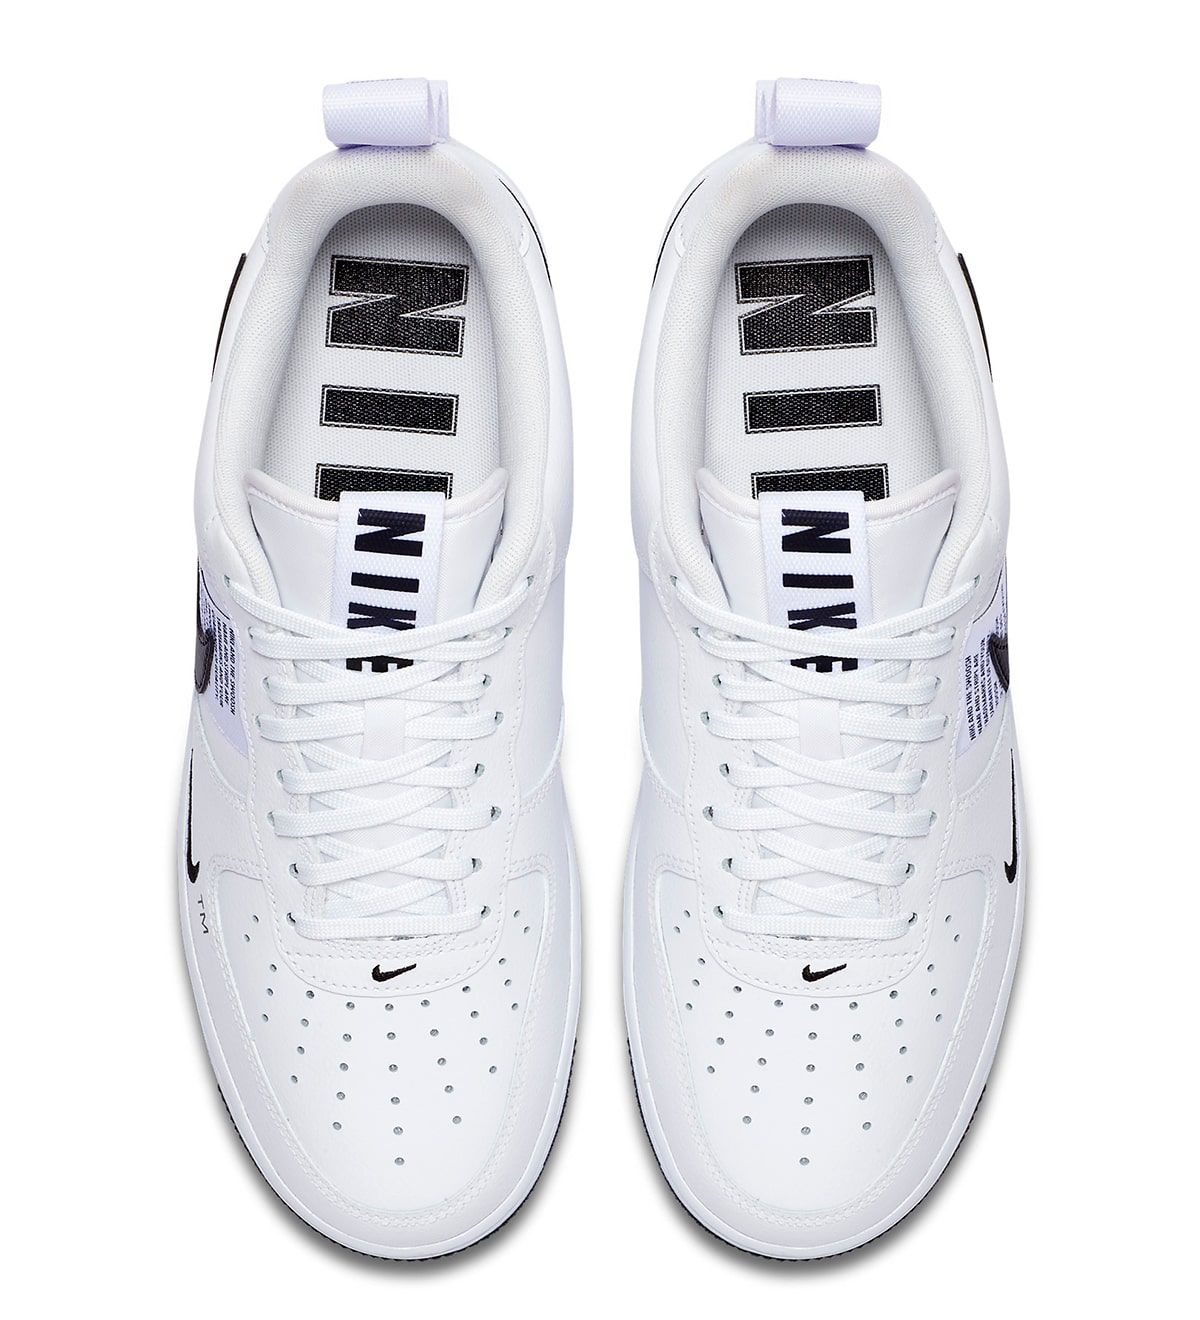 The New Nike Air Force 1 LV8 UL Comes 